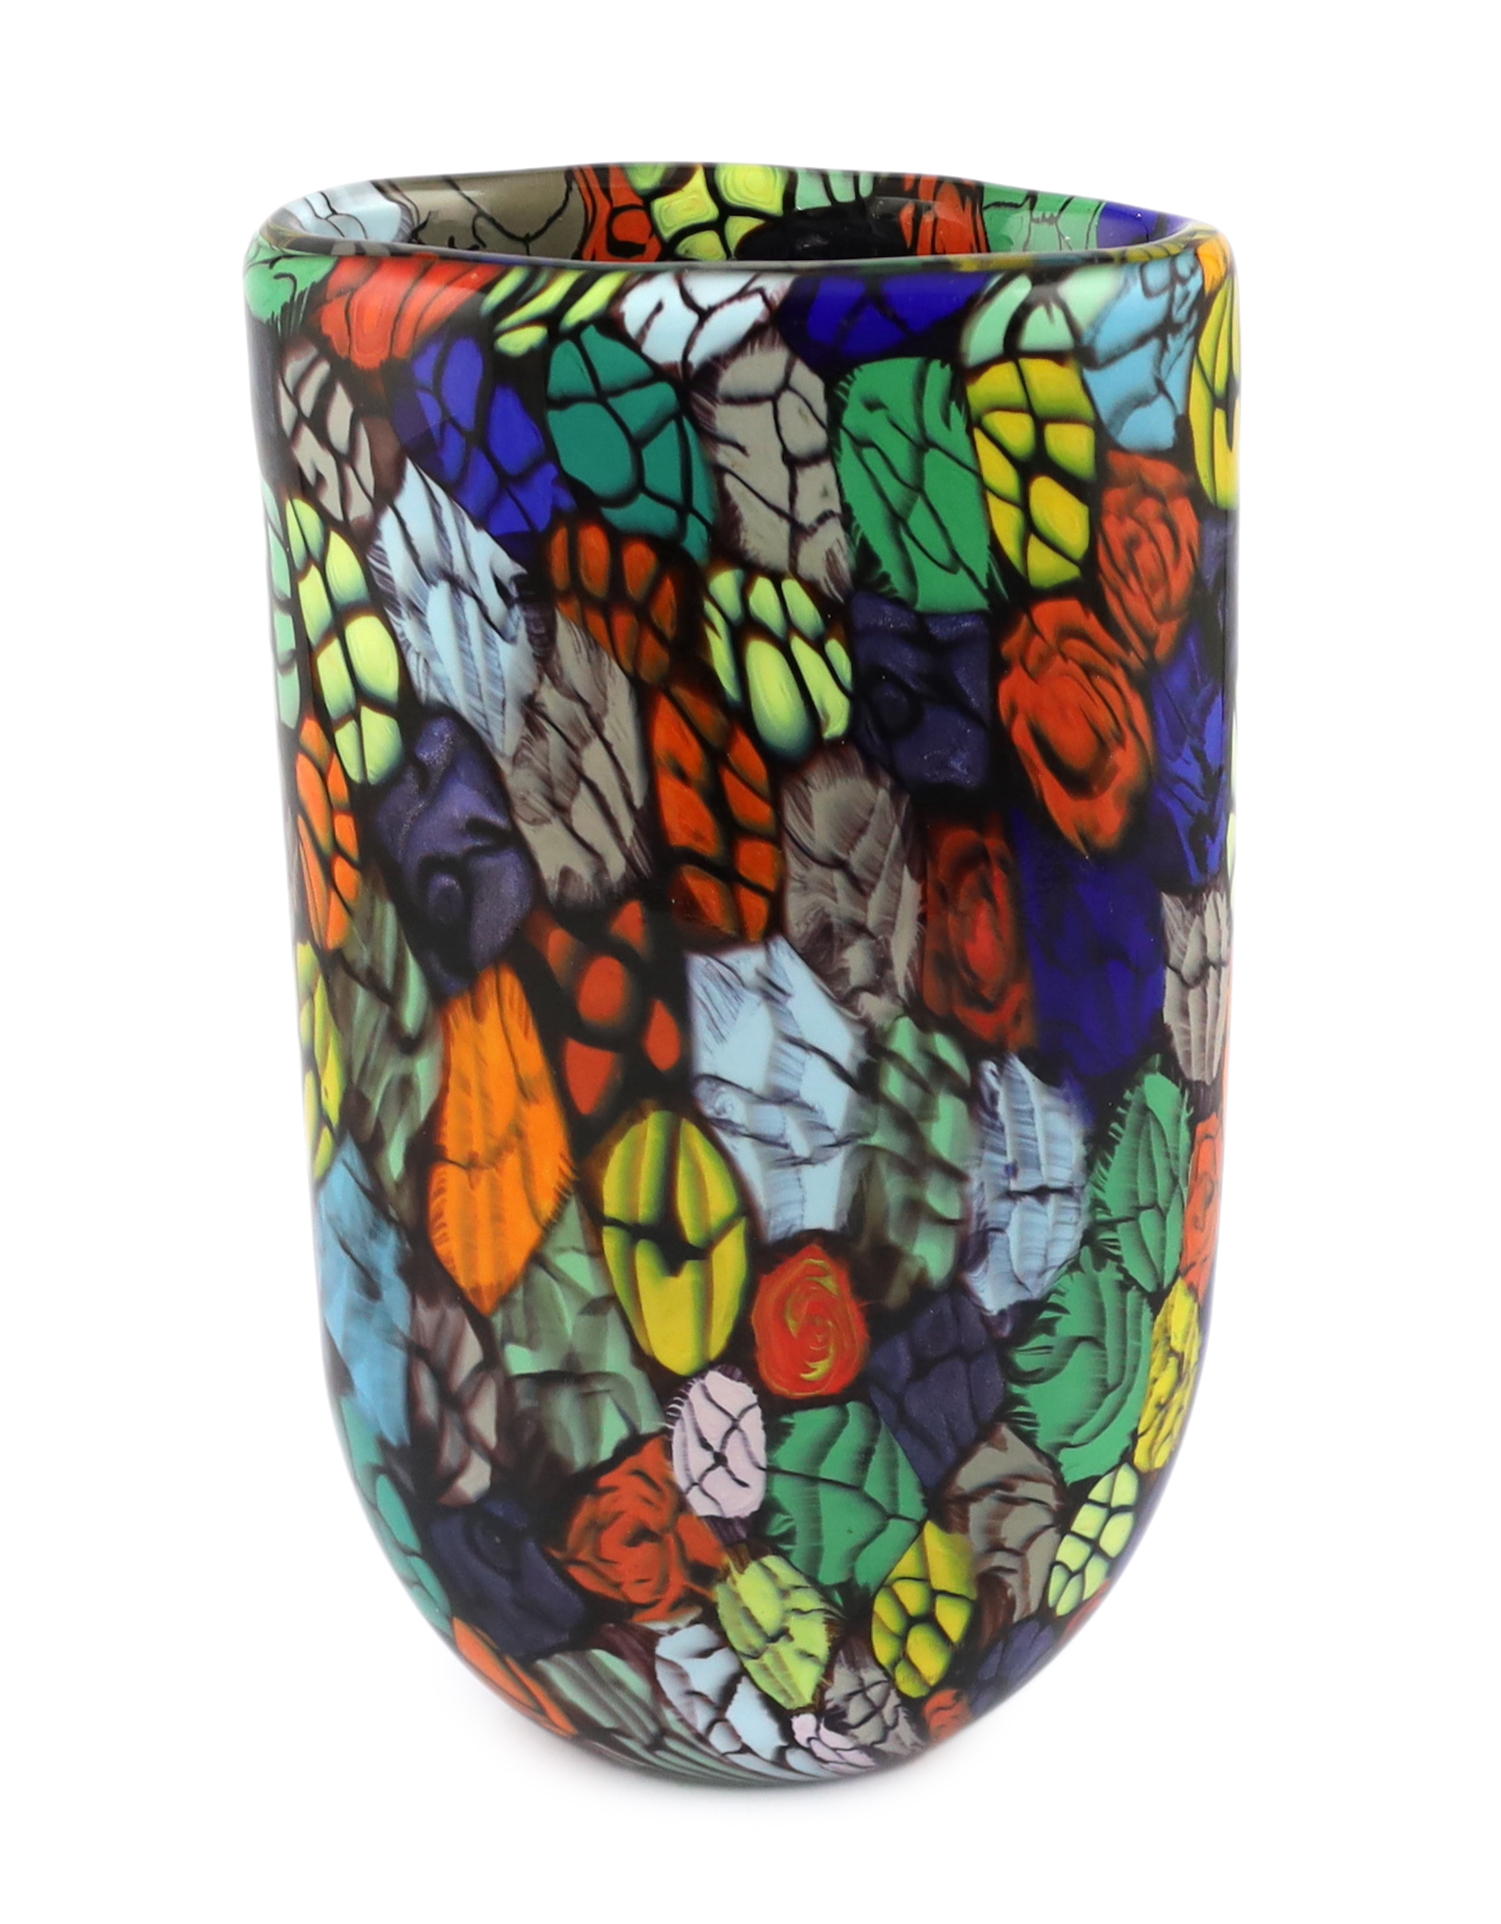 Vittorio Ferro (1932-2012) A Murano glass Murrine vase, decorated with red rosebuds on a green leaf ground, unsigned, 30cm, Please note this lot attracts an additional import tax of 20% on the hammer price